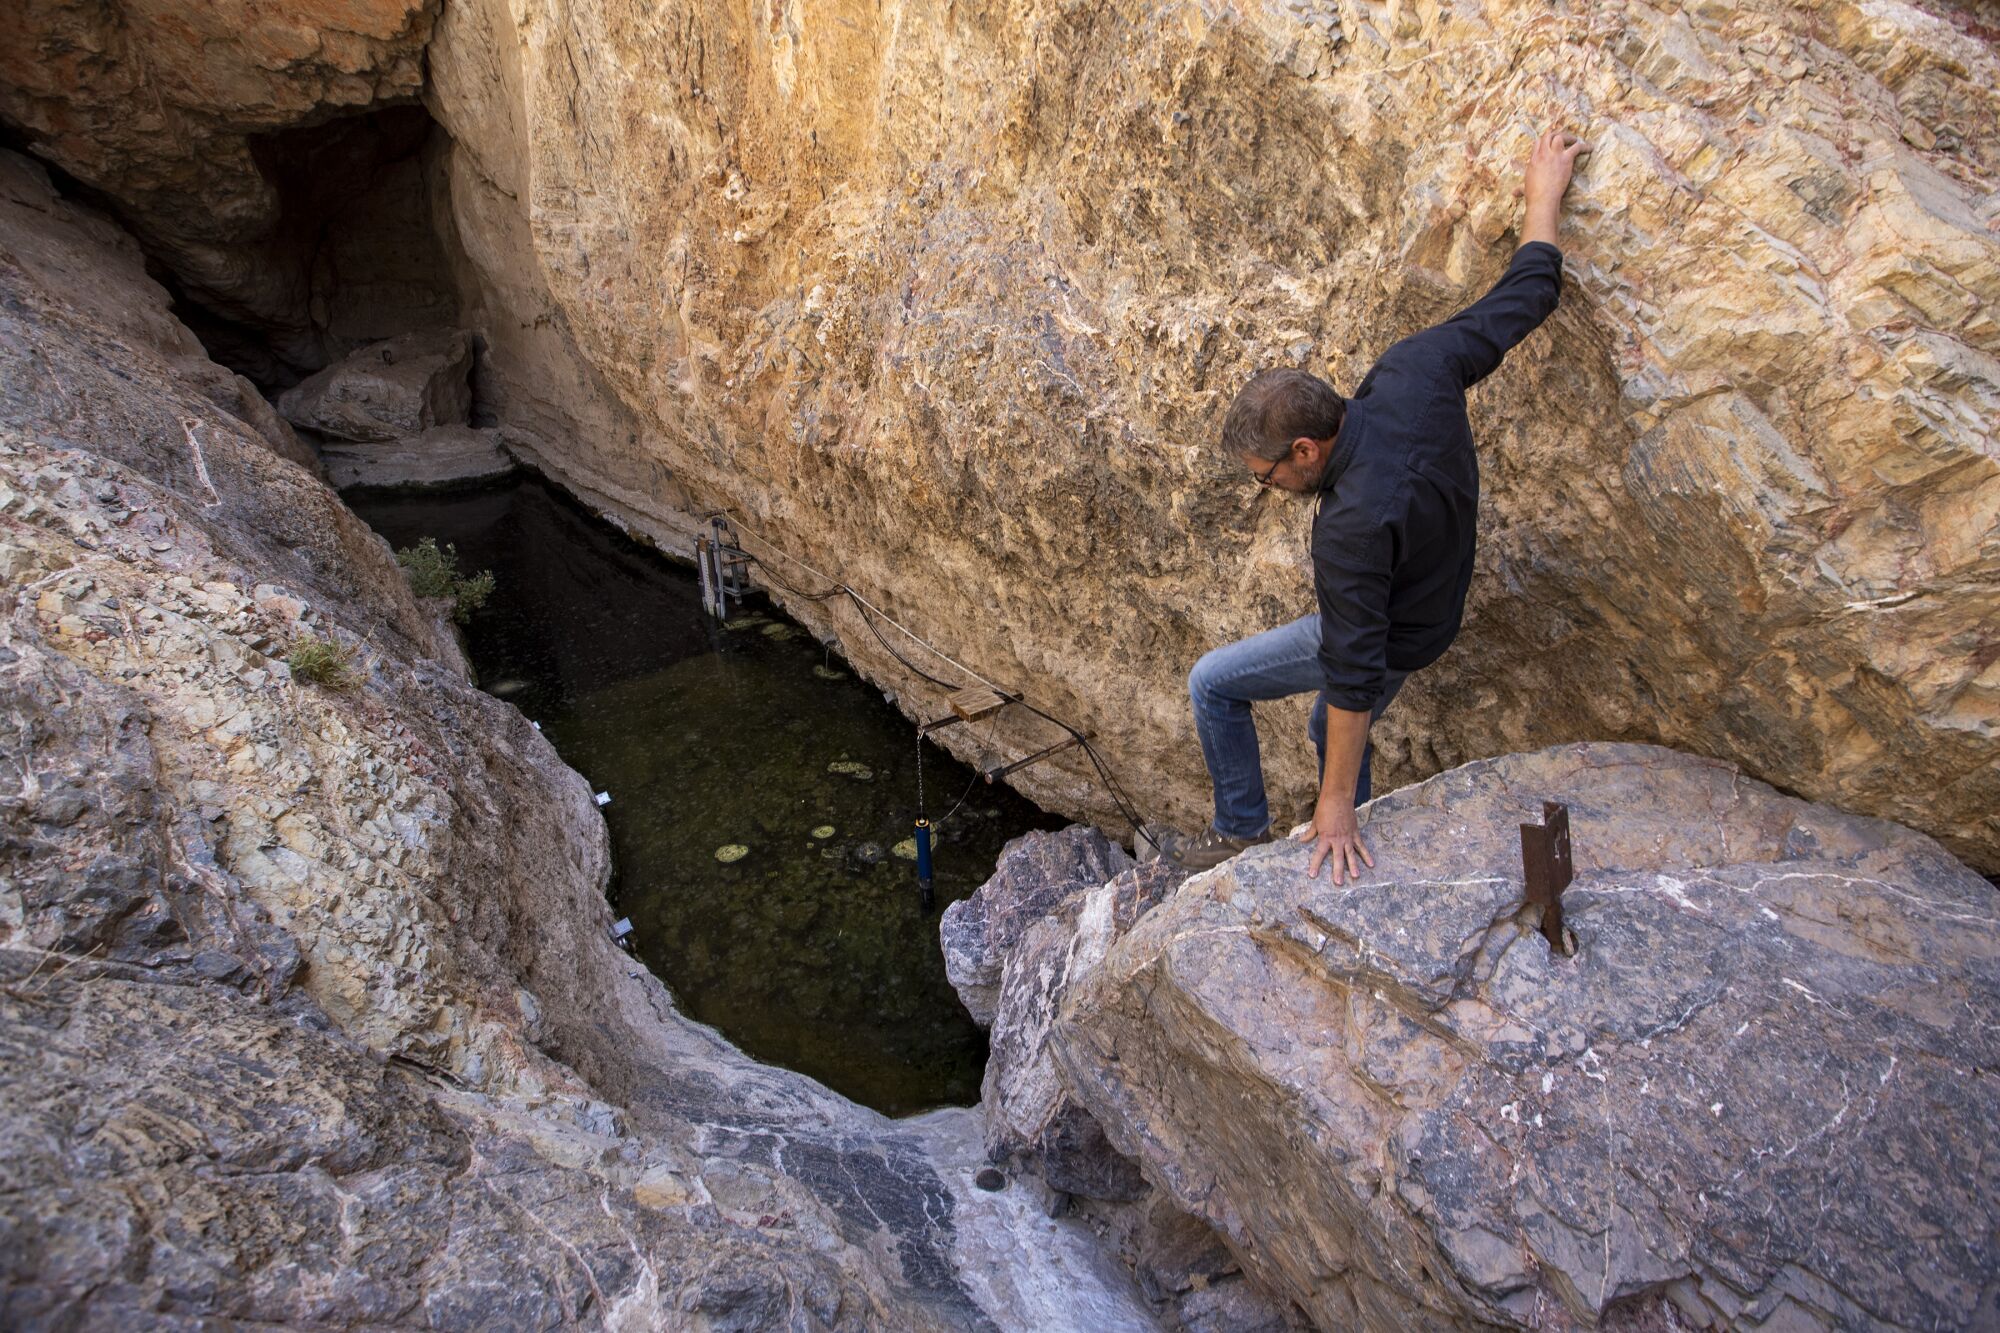 A man climbs down off a rock next to a small pool of water 